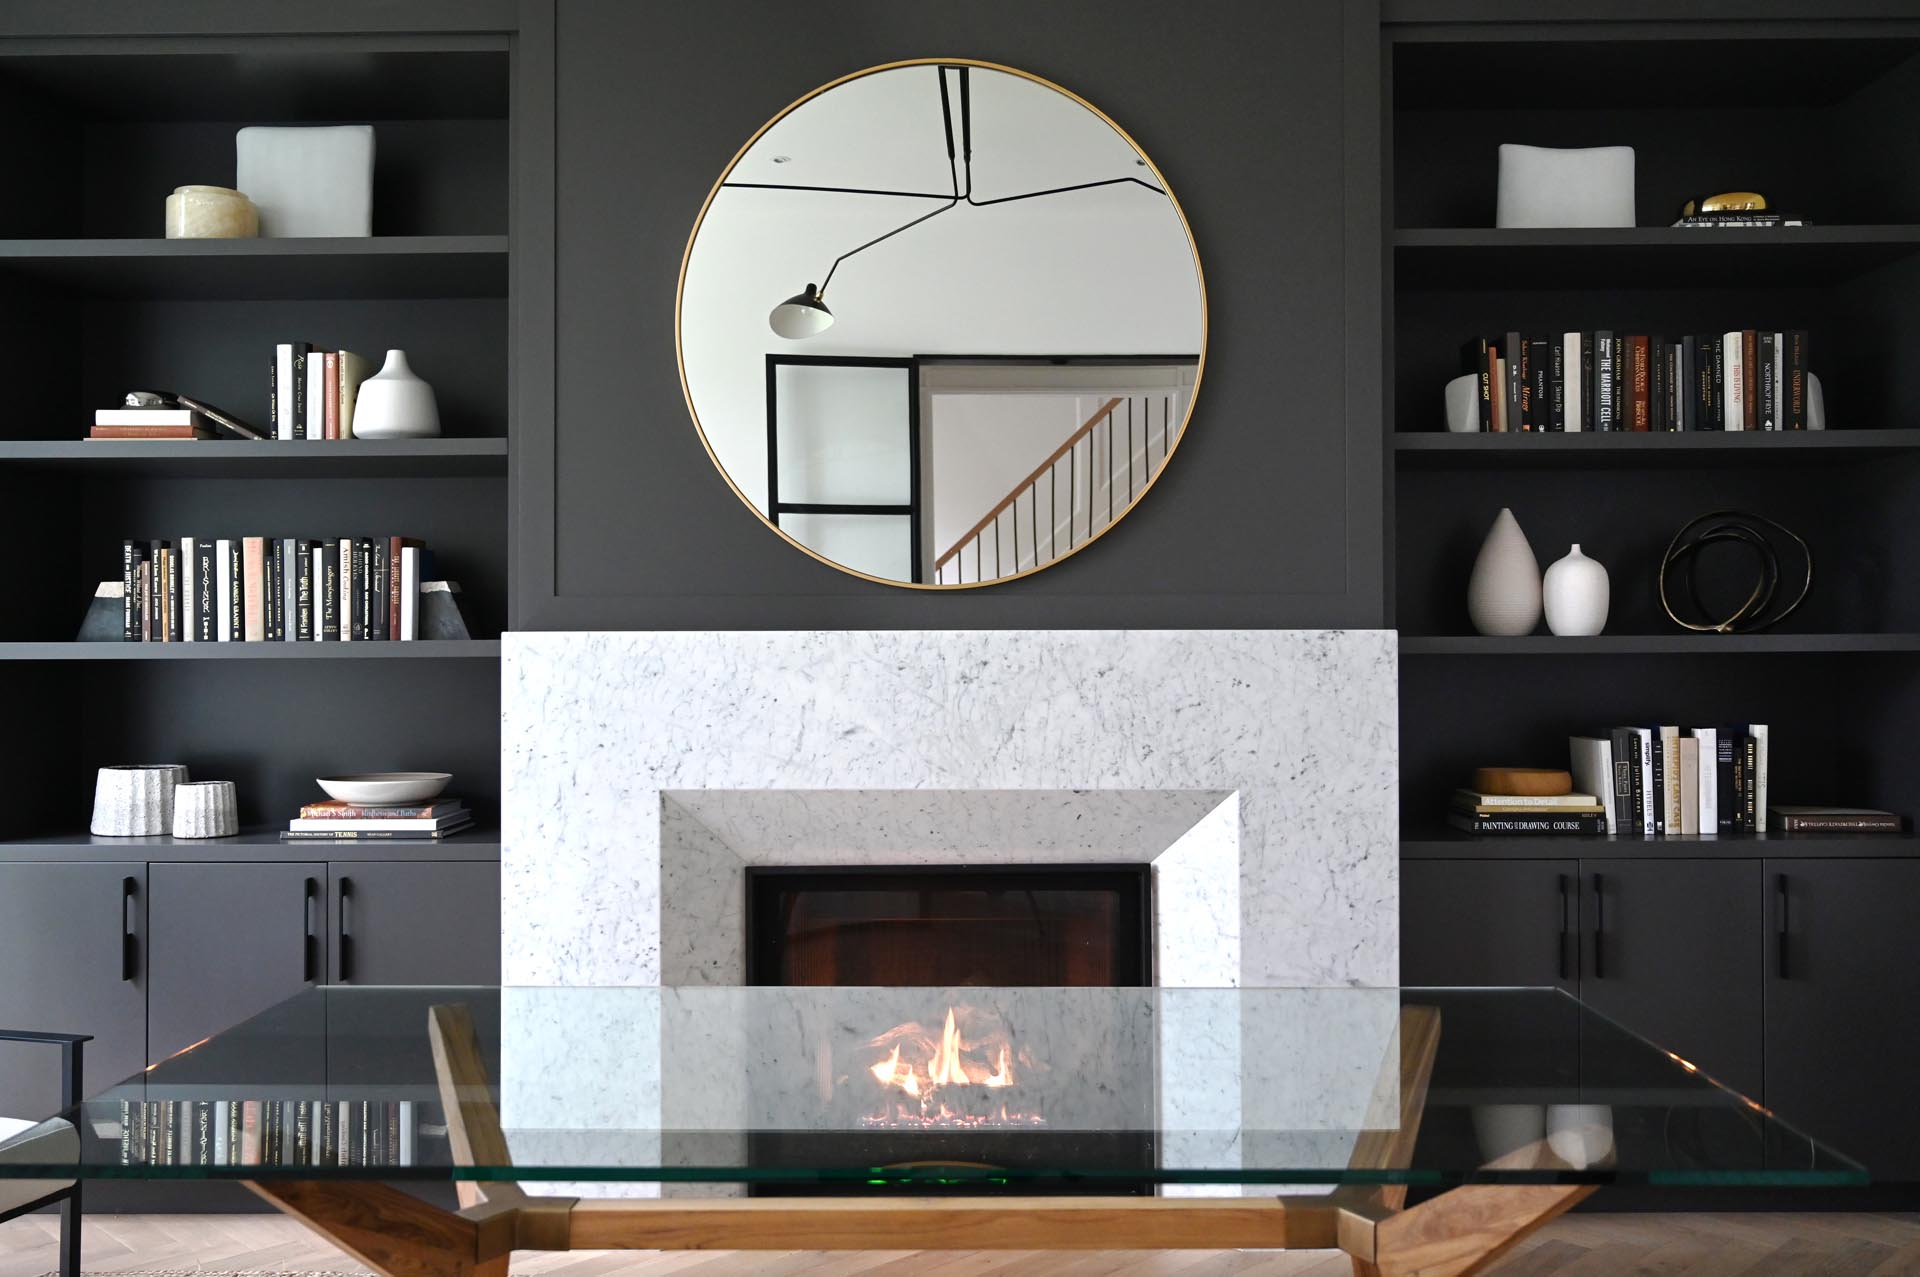 A modern home office has a black accent wall that provides a backdrop for the fireplace, while built-in shelving and cabinets add a storage element.